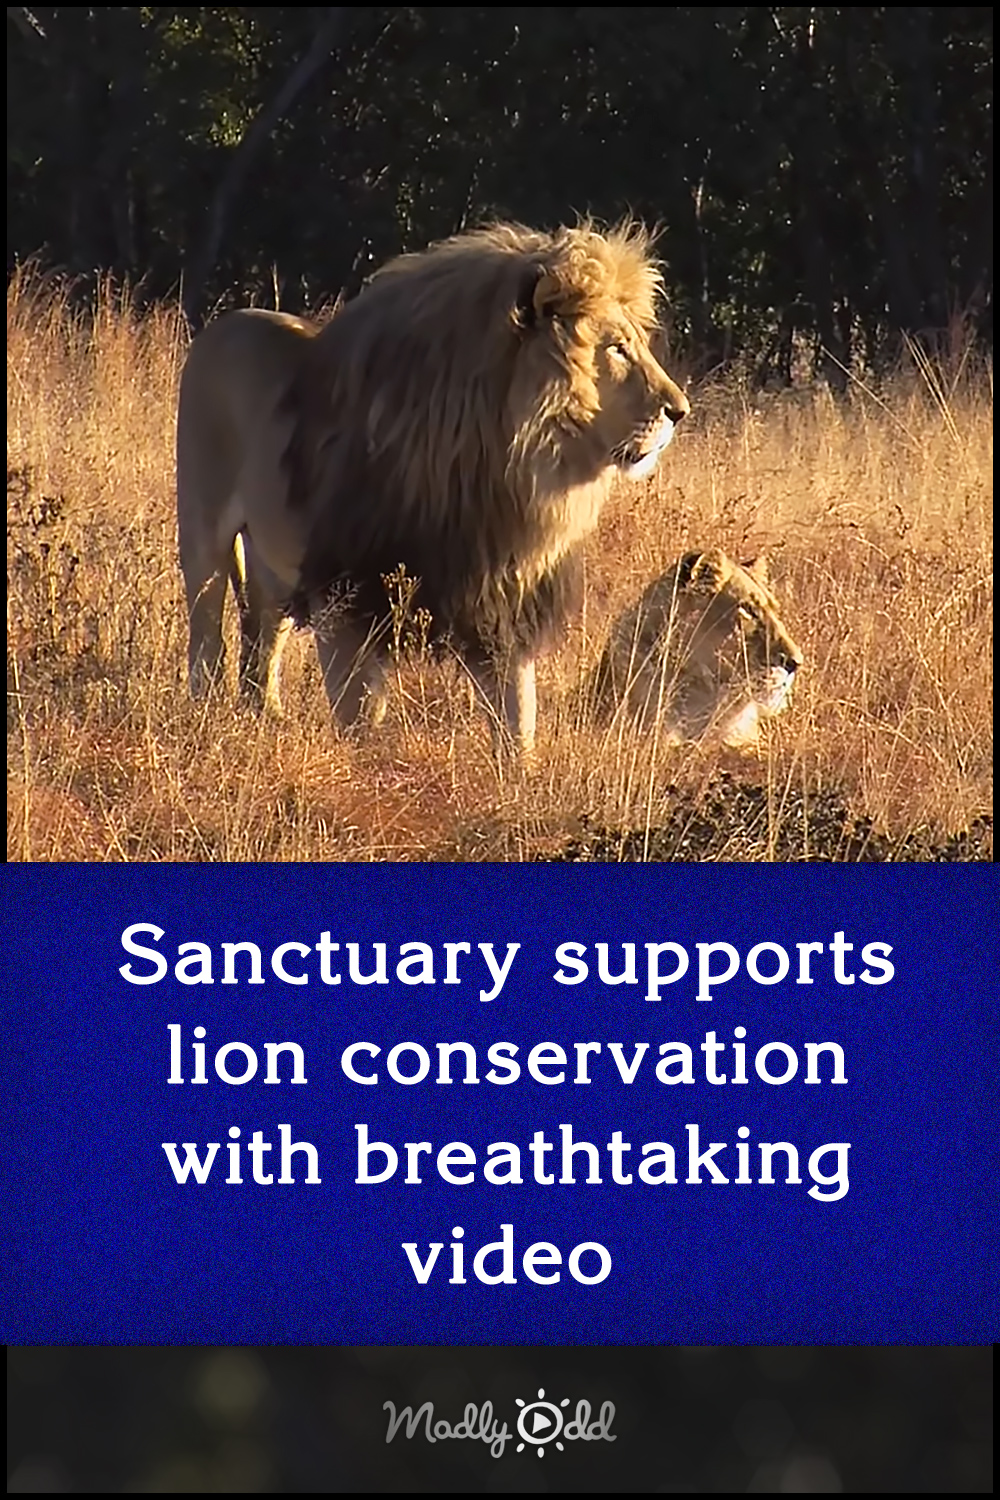 Sanctuary supports lion conservation with breathtaking video